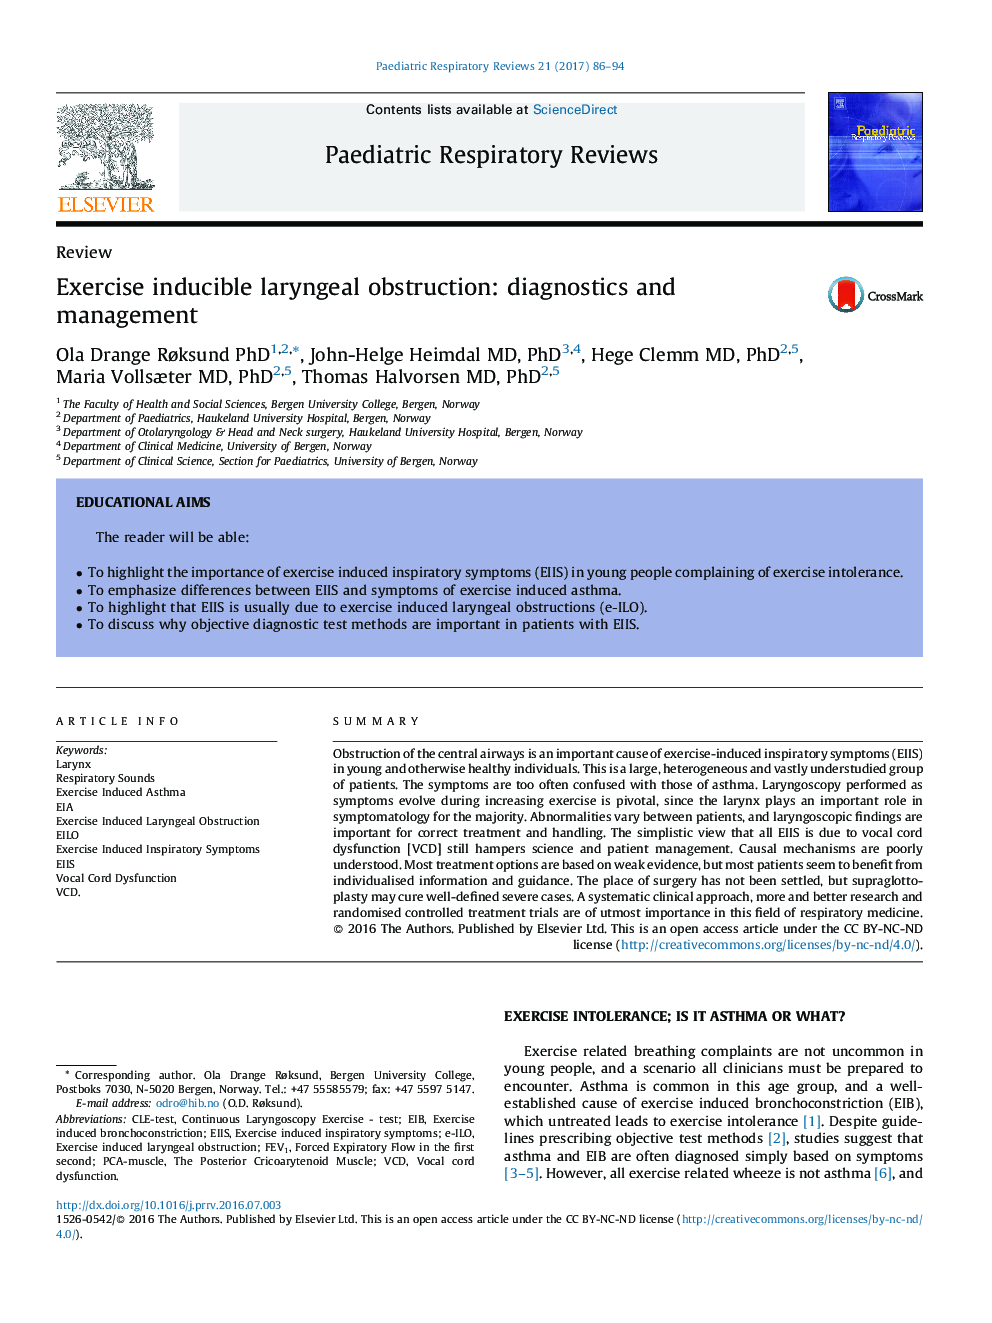 ReviewExercise inducible laryngeal obstruction: diagnostics and management